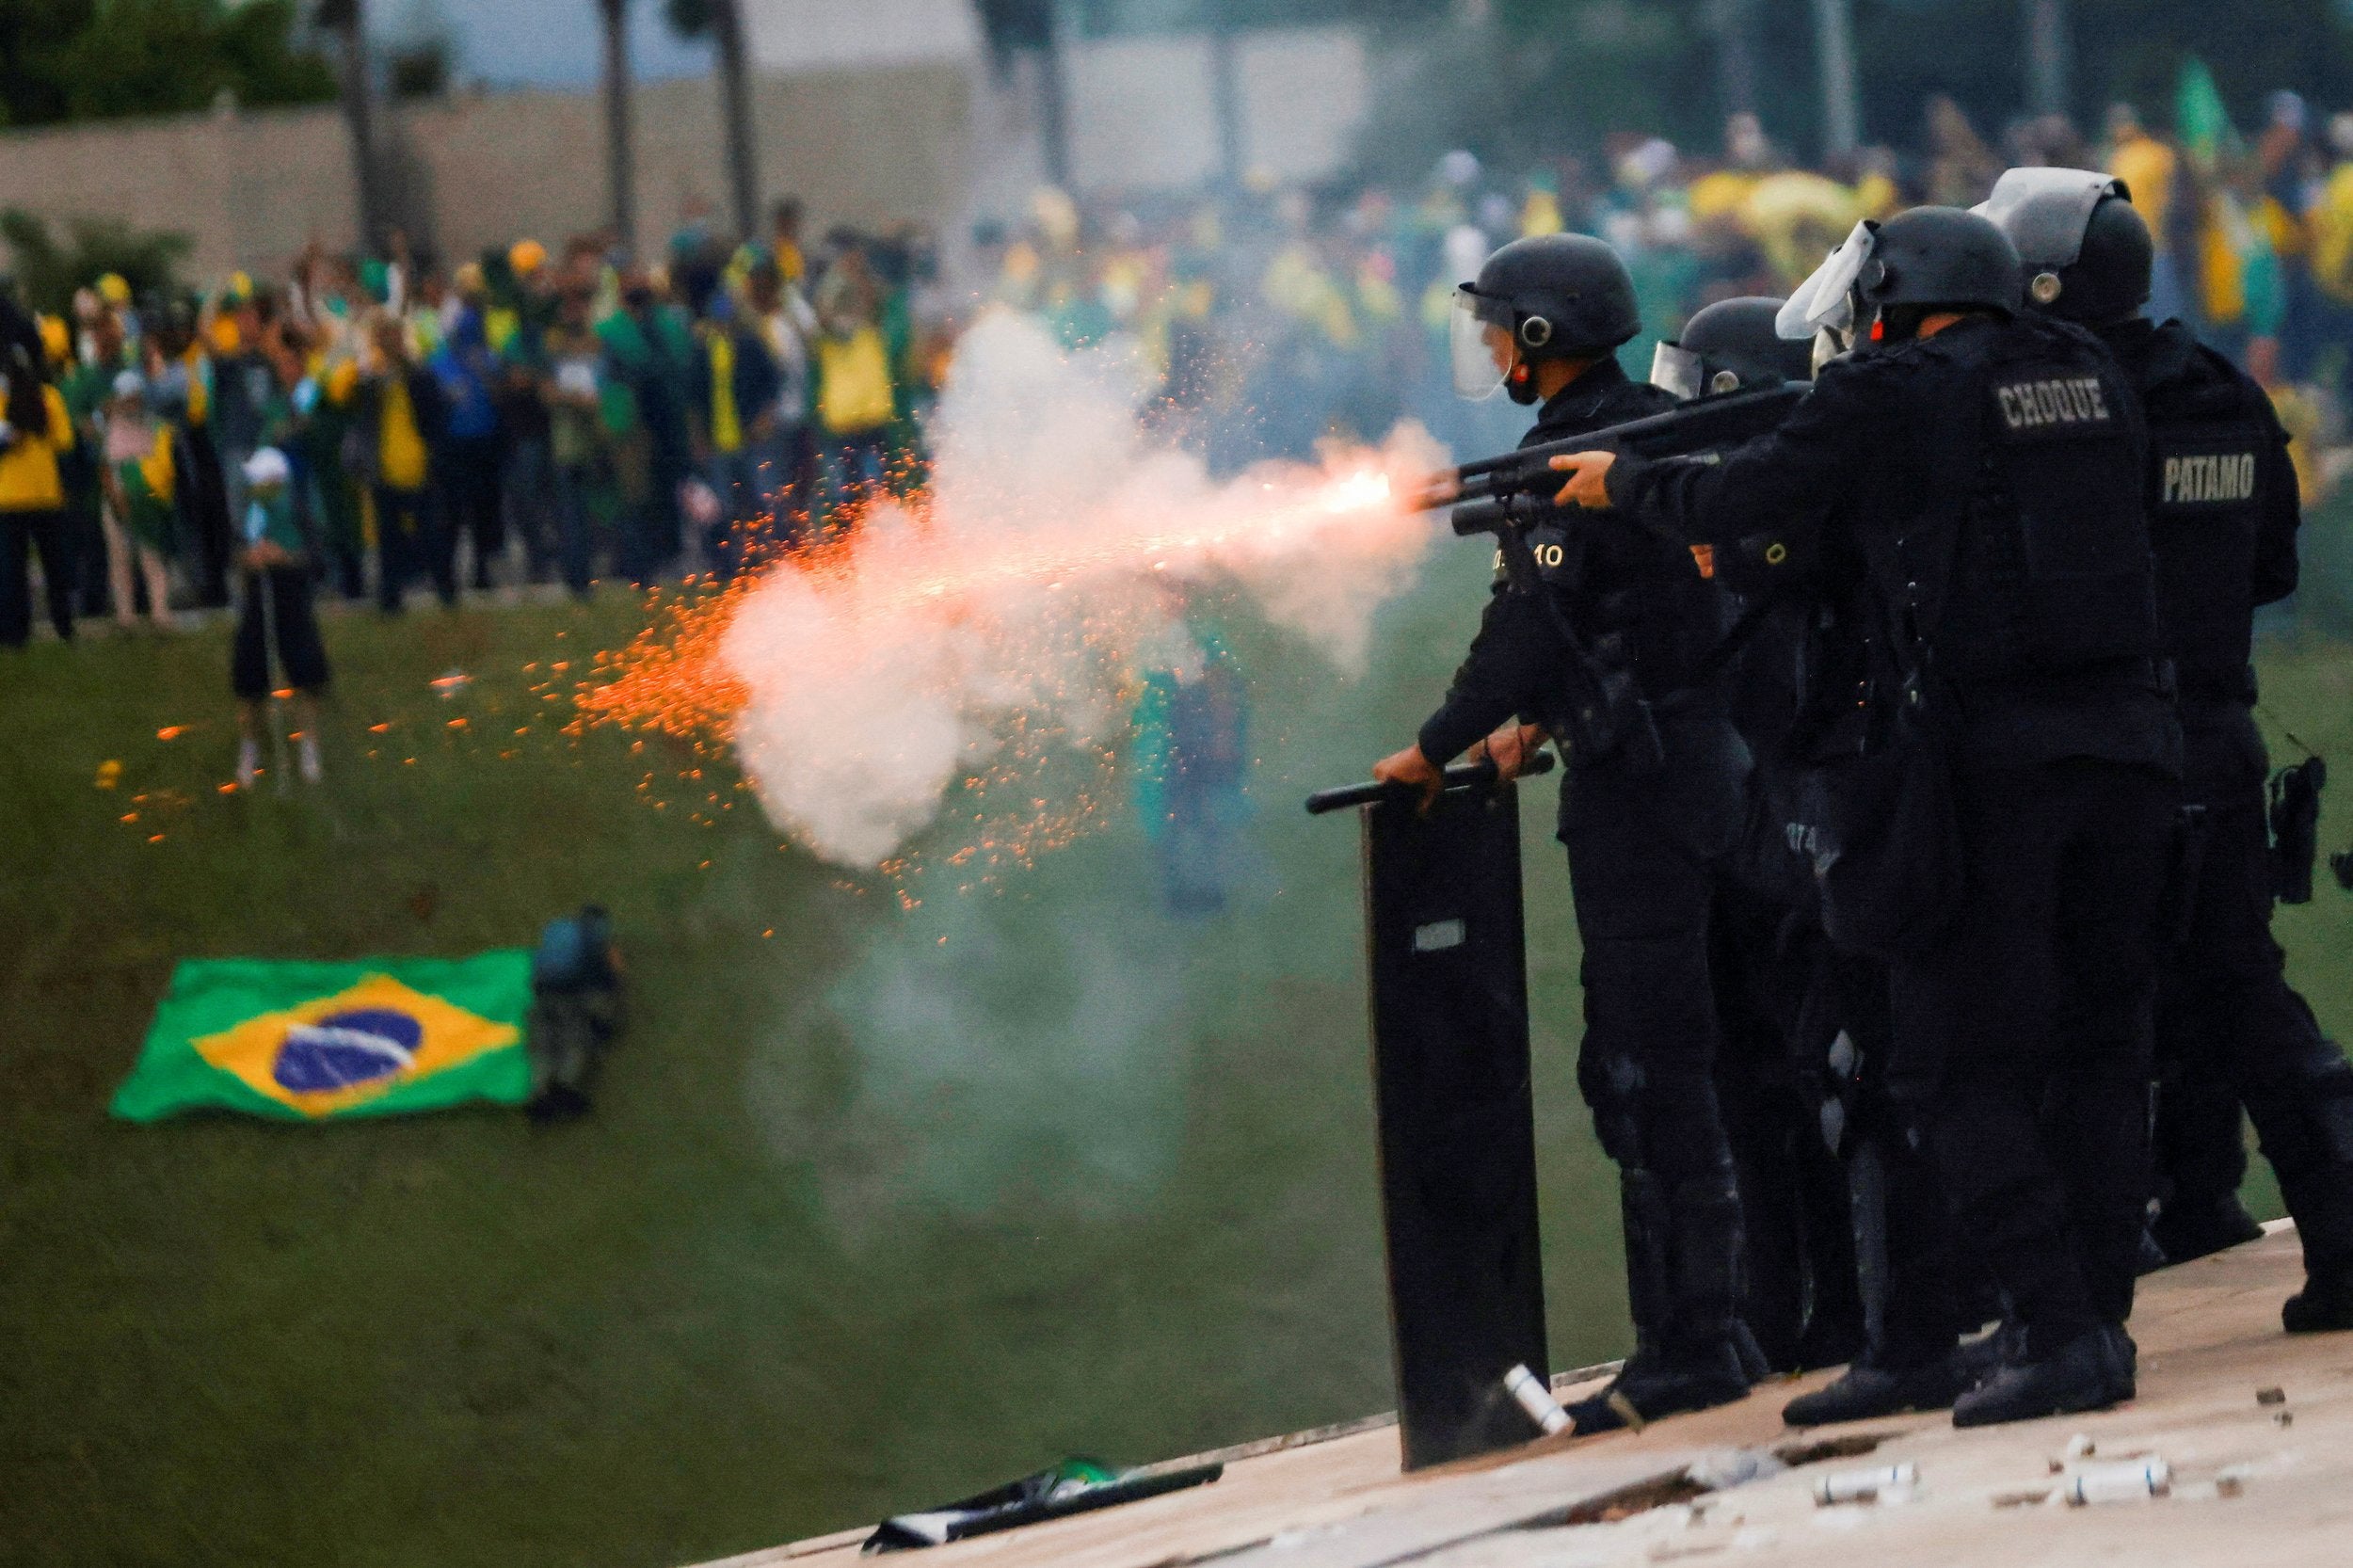 Brazil riot police deploy at Bolsonaro backers' camp after capital stormed